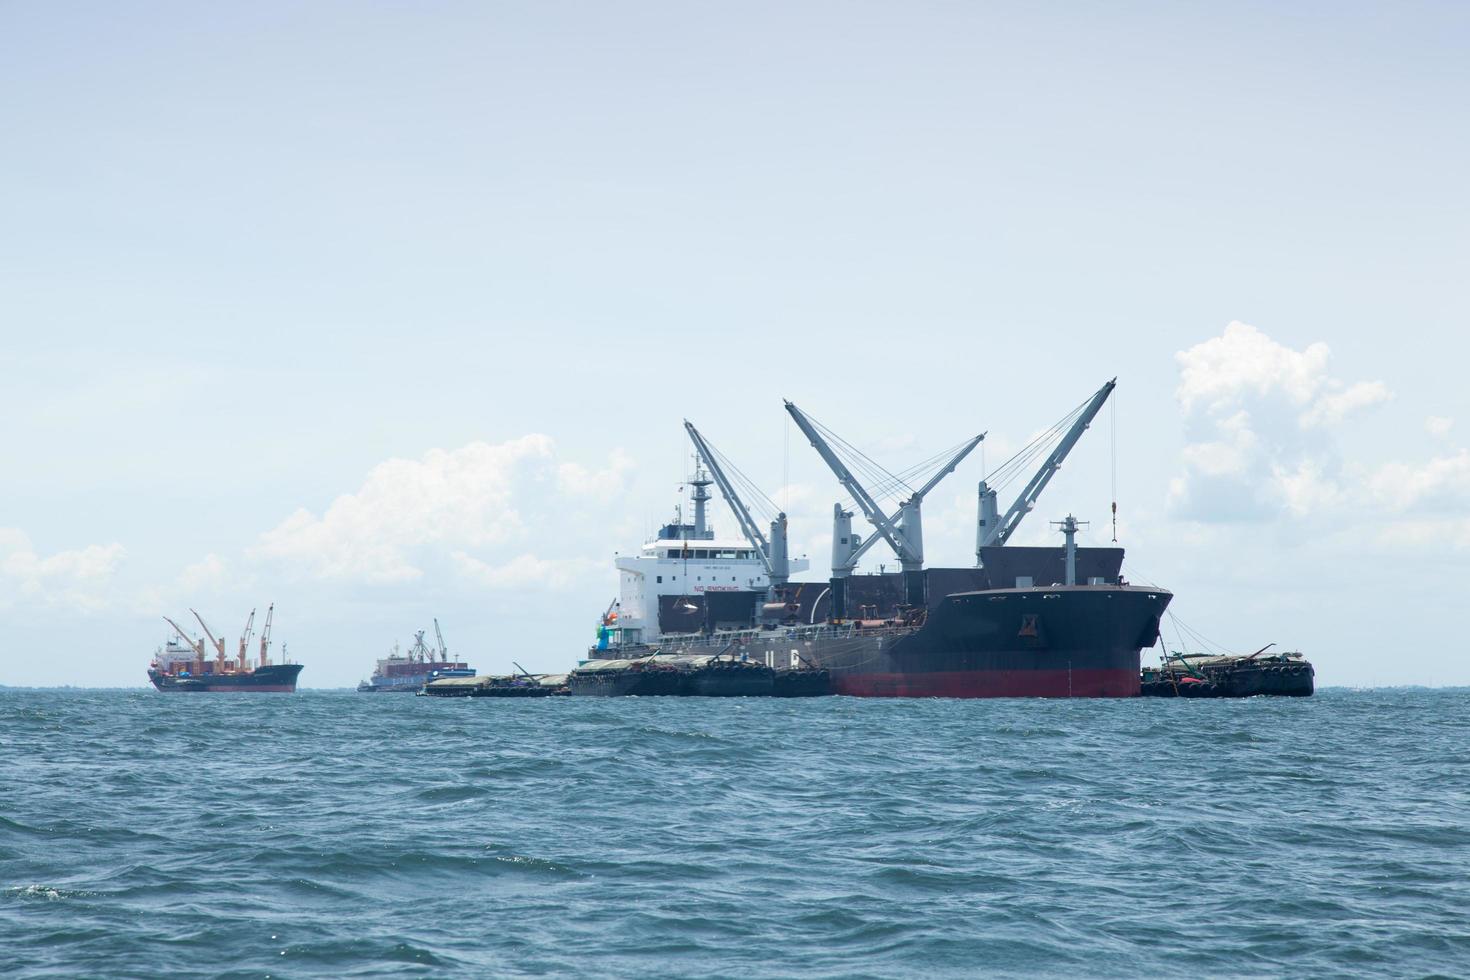 Large cargo ships in Thailand photo